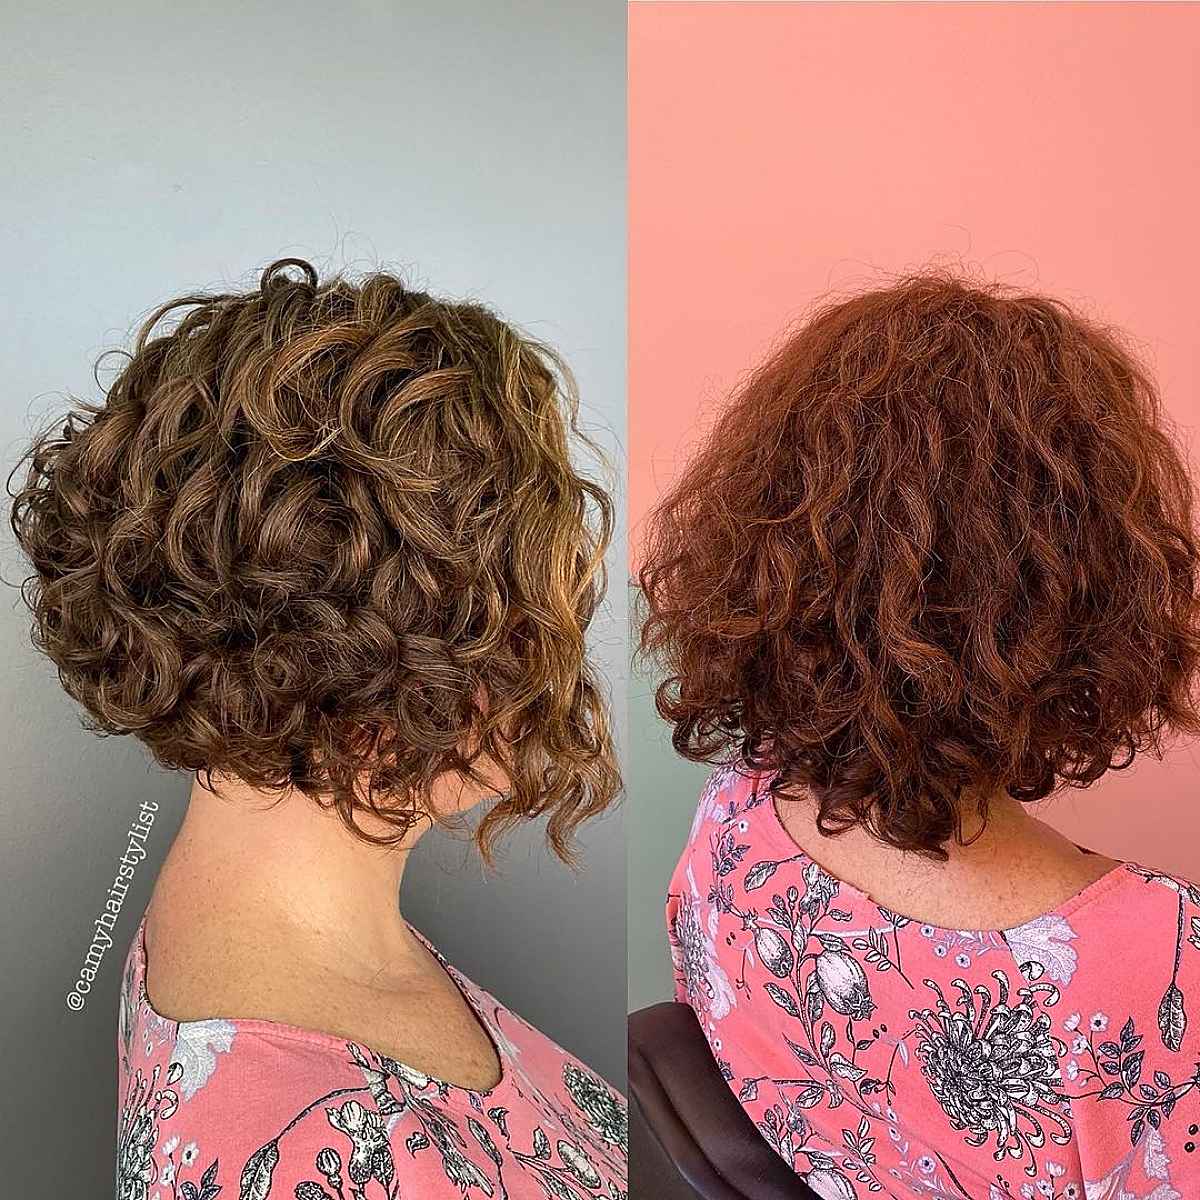 17 Stacked, Short Curly Bob Haircuts to Enhance Your Natural Curls